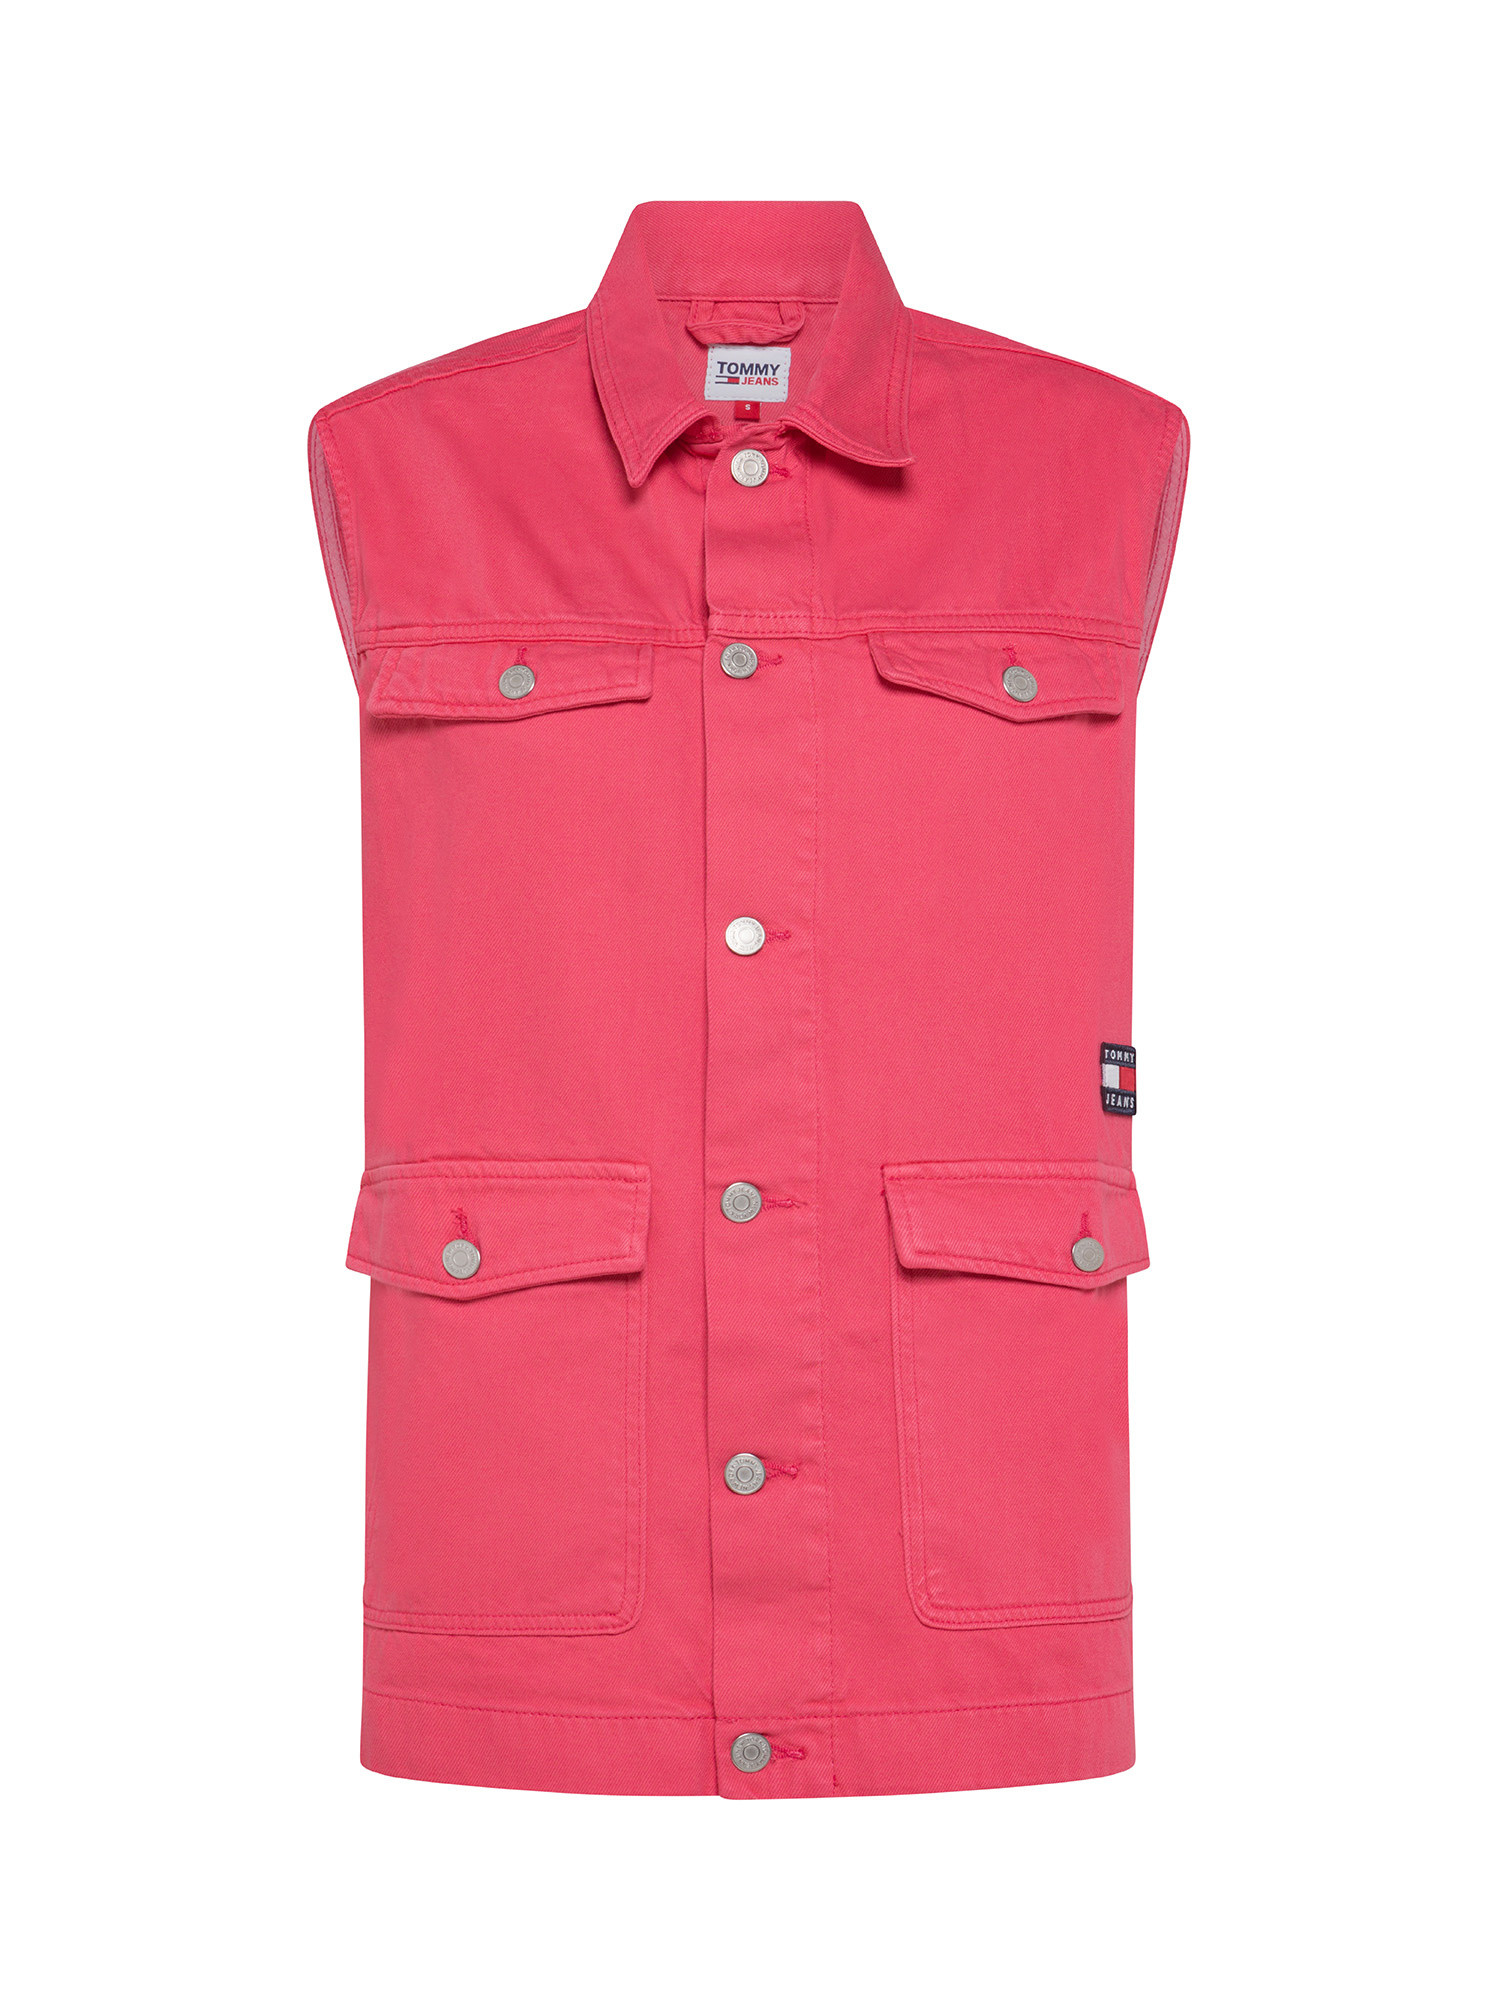 Tommy Jeans - Gilet in denim colorato, Rosa fuxia, large image number 0